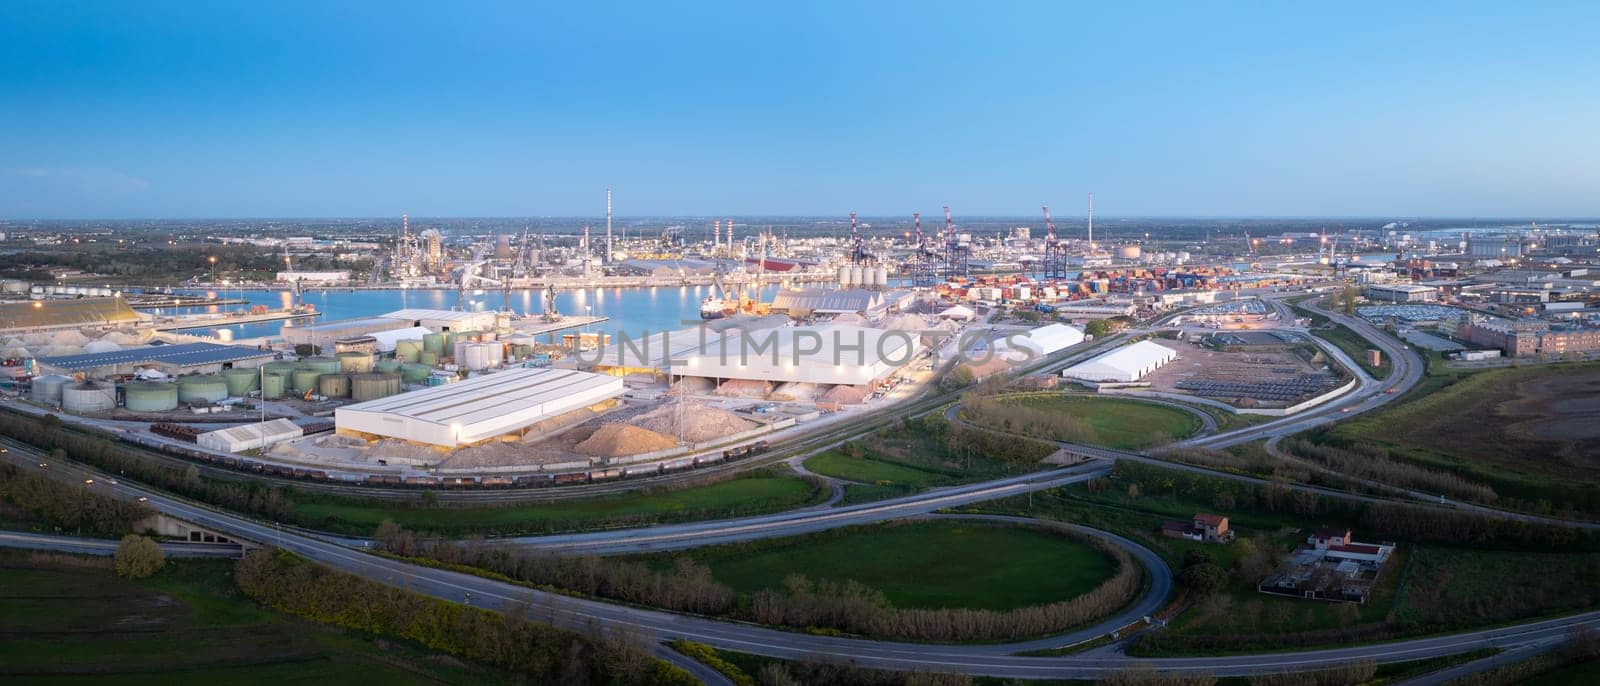 Aerial view of the thermoelectric and metallurgical plants at night by Robertobinetti70